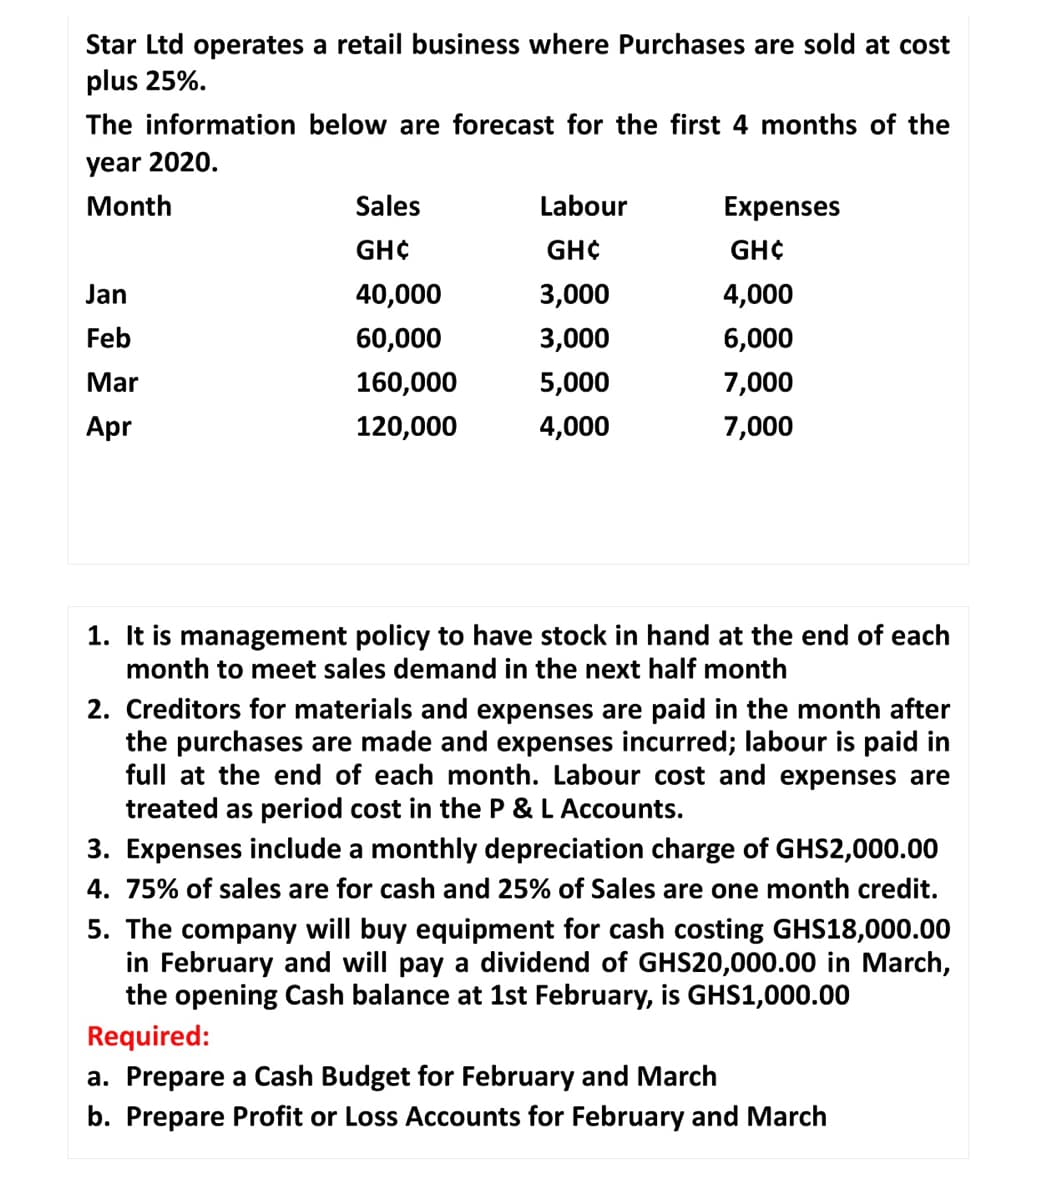 Star Ltd operates a retail business where Purchases are sold at cost
plus 25%.
The information below are forecast for the first 4 months of the
year 2020.
Month
Sales
Labour
Expenses
GH¢
GH¢
GH¢
Jan
40,000
3,000
4,000
Feb
60,000
3,000
6,000
Mar
160,000
5,000
7,000
Apr
120,000
4,000
7,000
1. It is management policy to have stock in hand at the end of each
month to meet sales demand in the next half month
2. Creditors for materials and expenses are paid in the month after
the purchases are made and expenses incurred; labour is paid in
full at the end of each month. Labour cost and expenses are
treated as period cost in the P & L Accounts.
3. Expenses include a monthly depreciation charge of GHS2,000.00
4. 75% of sales are for cash and 25% of Sales are one month credit.
5. The company will buy equipment for cash costing GHS18,000.00
in February and will pay a dividend of GHS20,000.00 in March,
the opening Cash balance at 1st February, is GHS1,000.00
Required:
a. Prepare a Cash Budget for February and March
b. Prepare Profit or Loss Accounts for February and March
